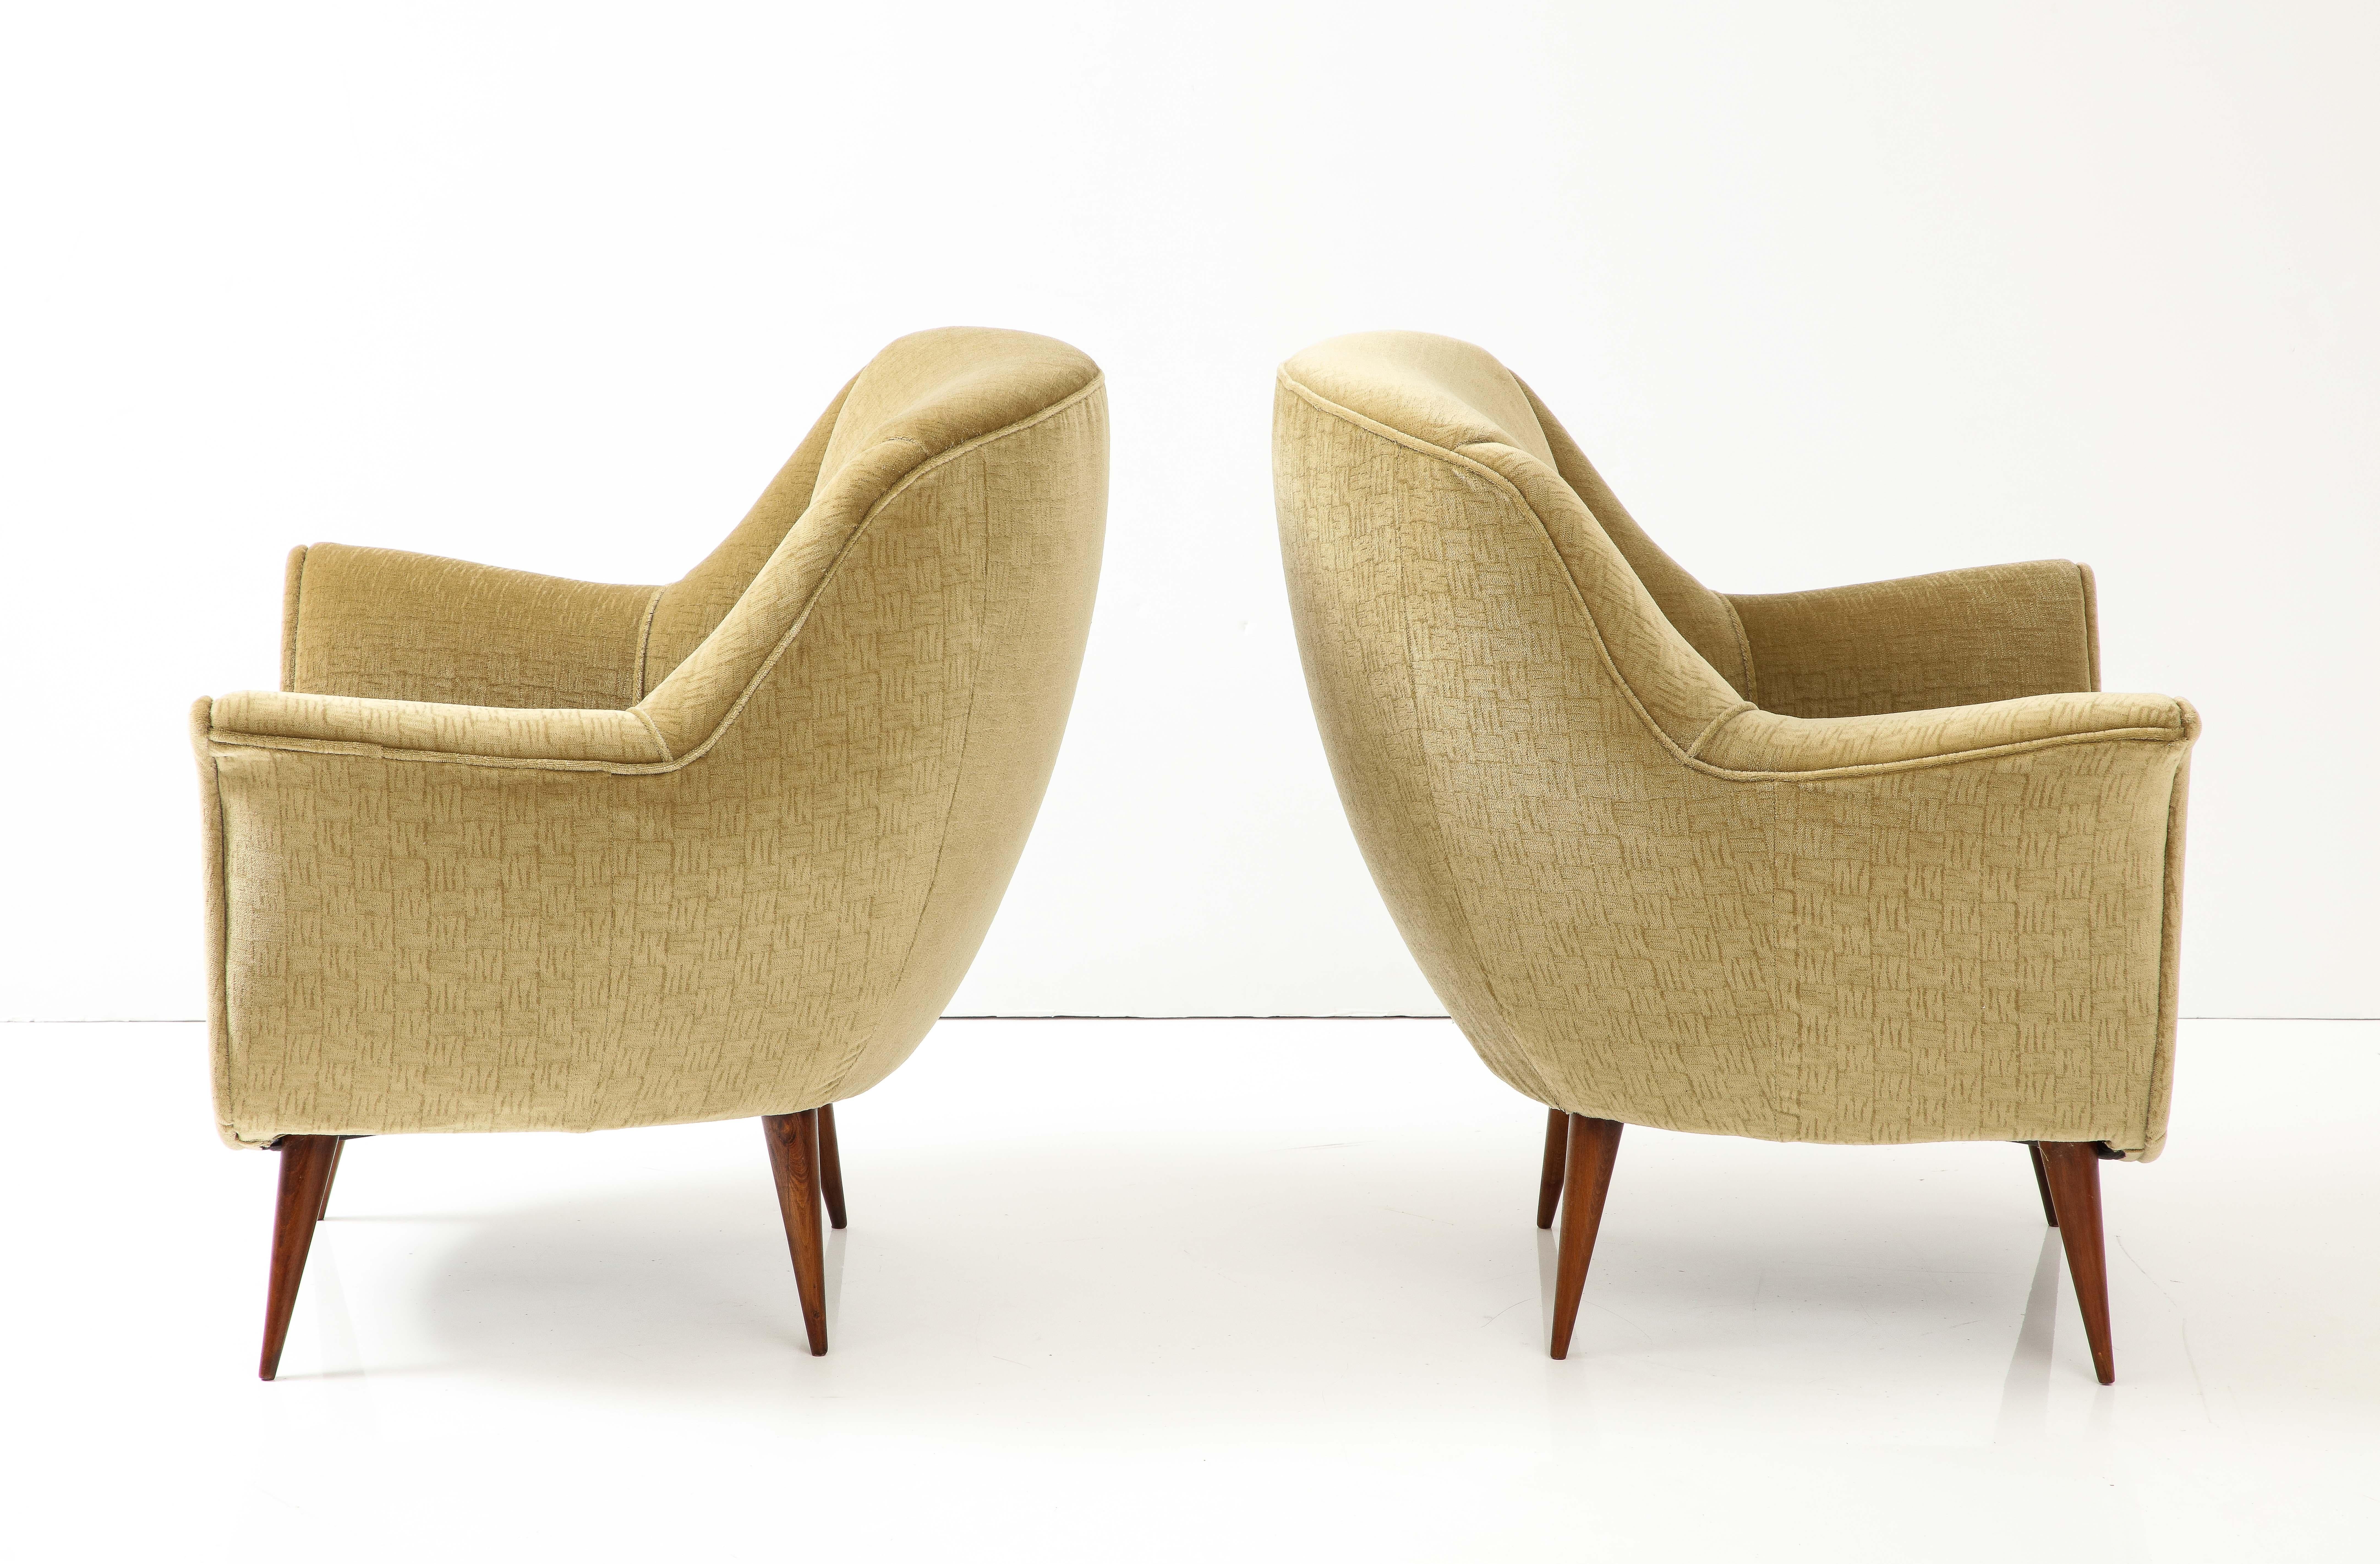 Beautiful pair of 1950's modernist lounge chairs in the style of Gio Ponti, fully restored and re-upholstered in Donghia Mohair fabric, with minor wear and patina due to age and use.